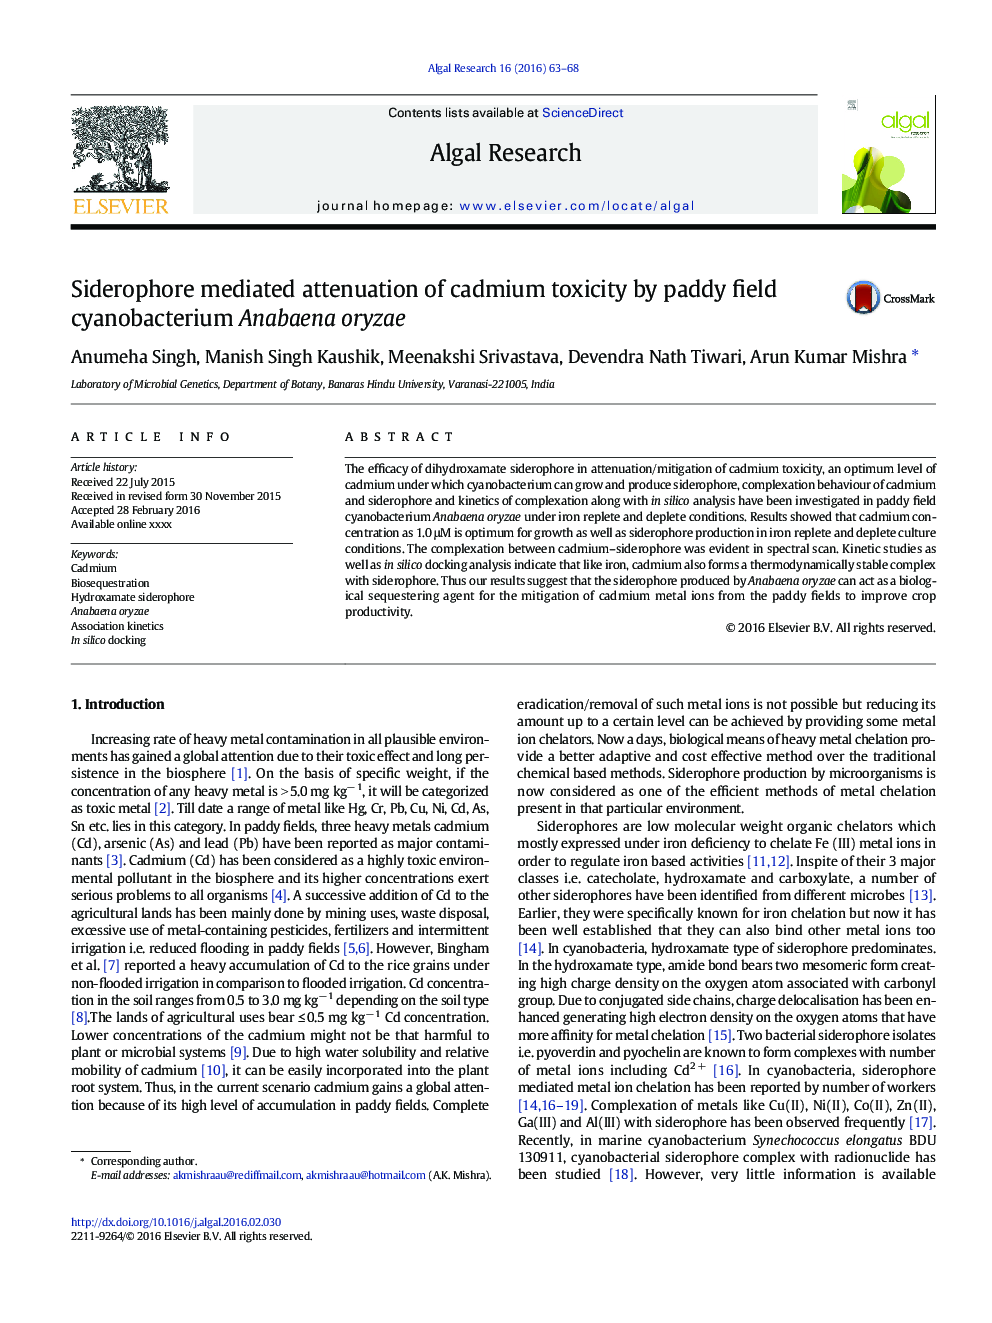 Siderophore mediated attenuation of cadmium toxicity by paddy field cyanobacterium Anabaena oryzae